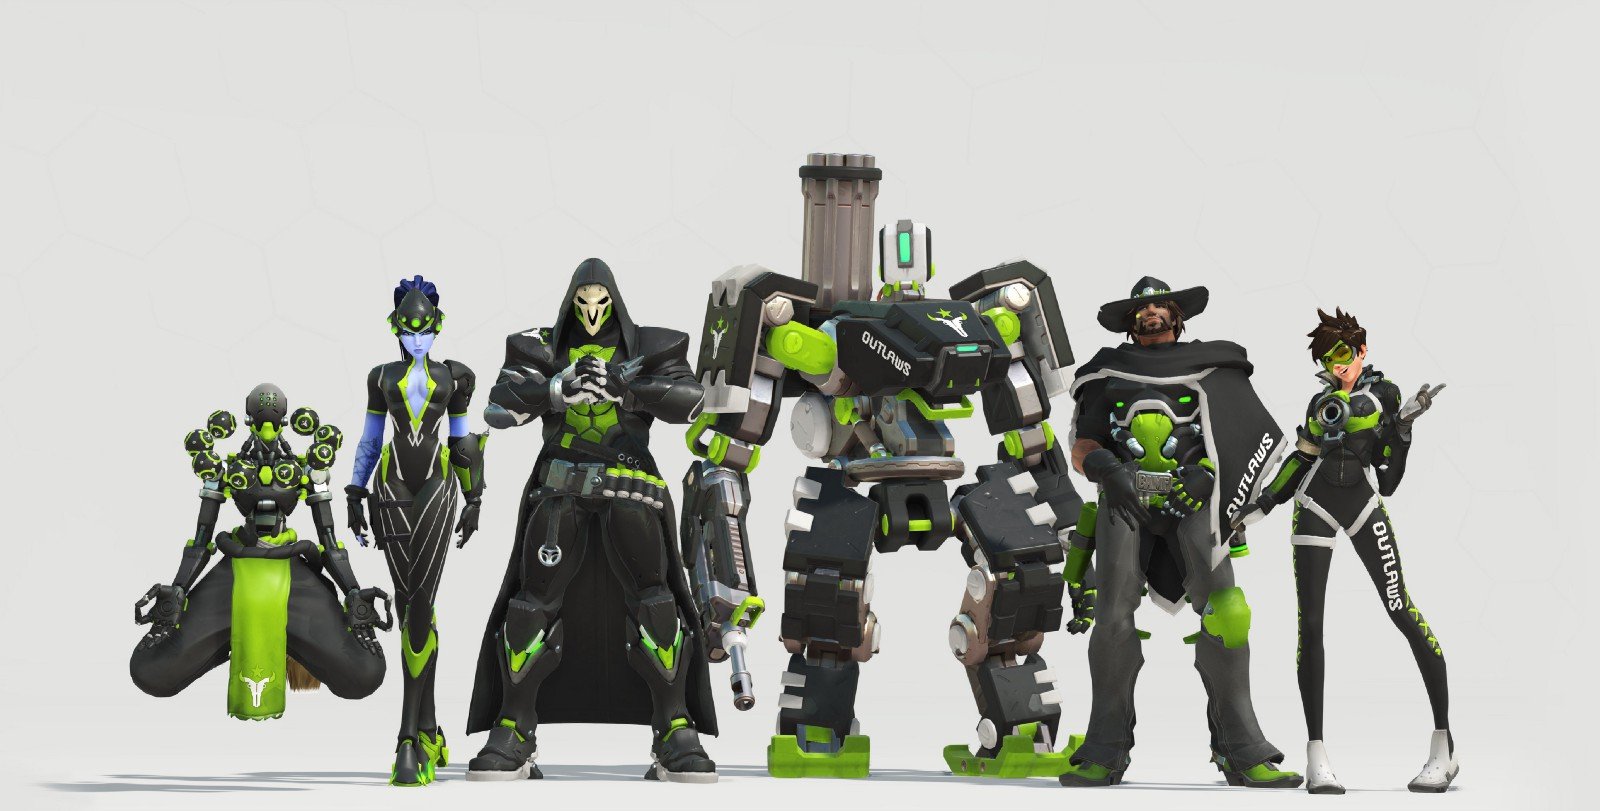 Overwatch League Guide Where Can I Watch It, When Do the Skins Come Out and More